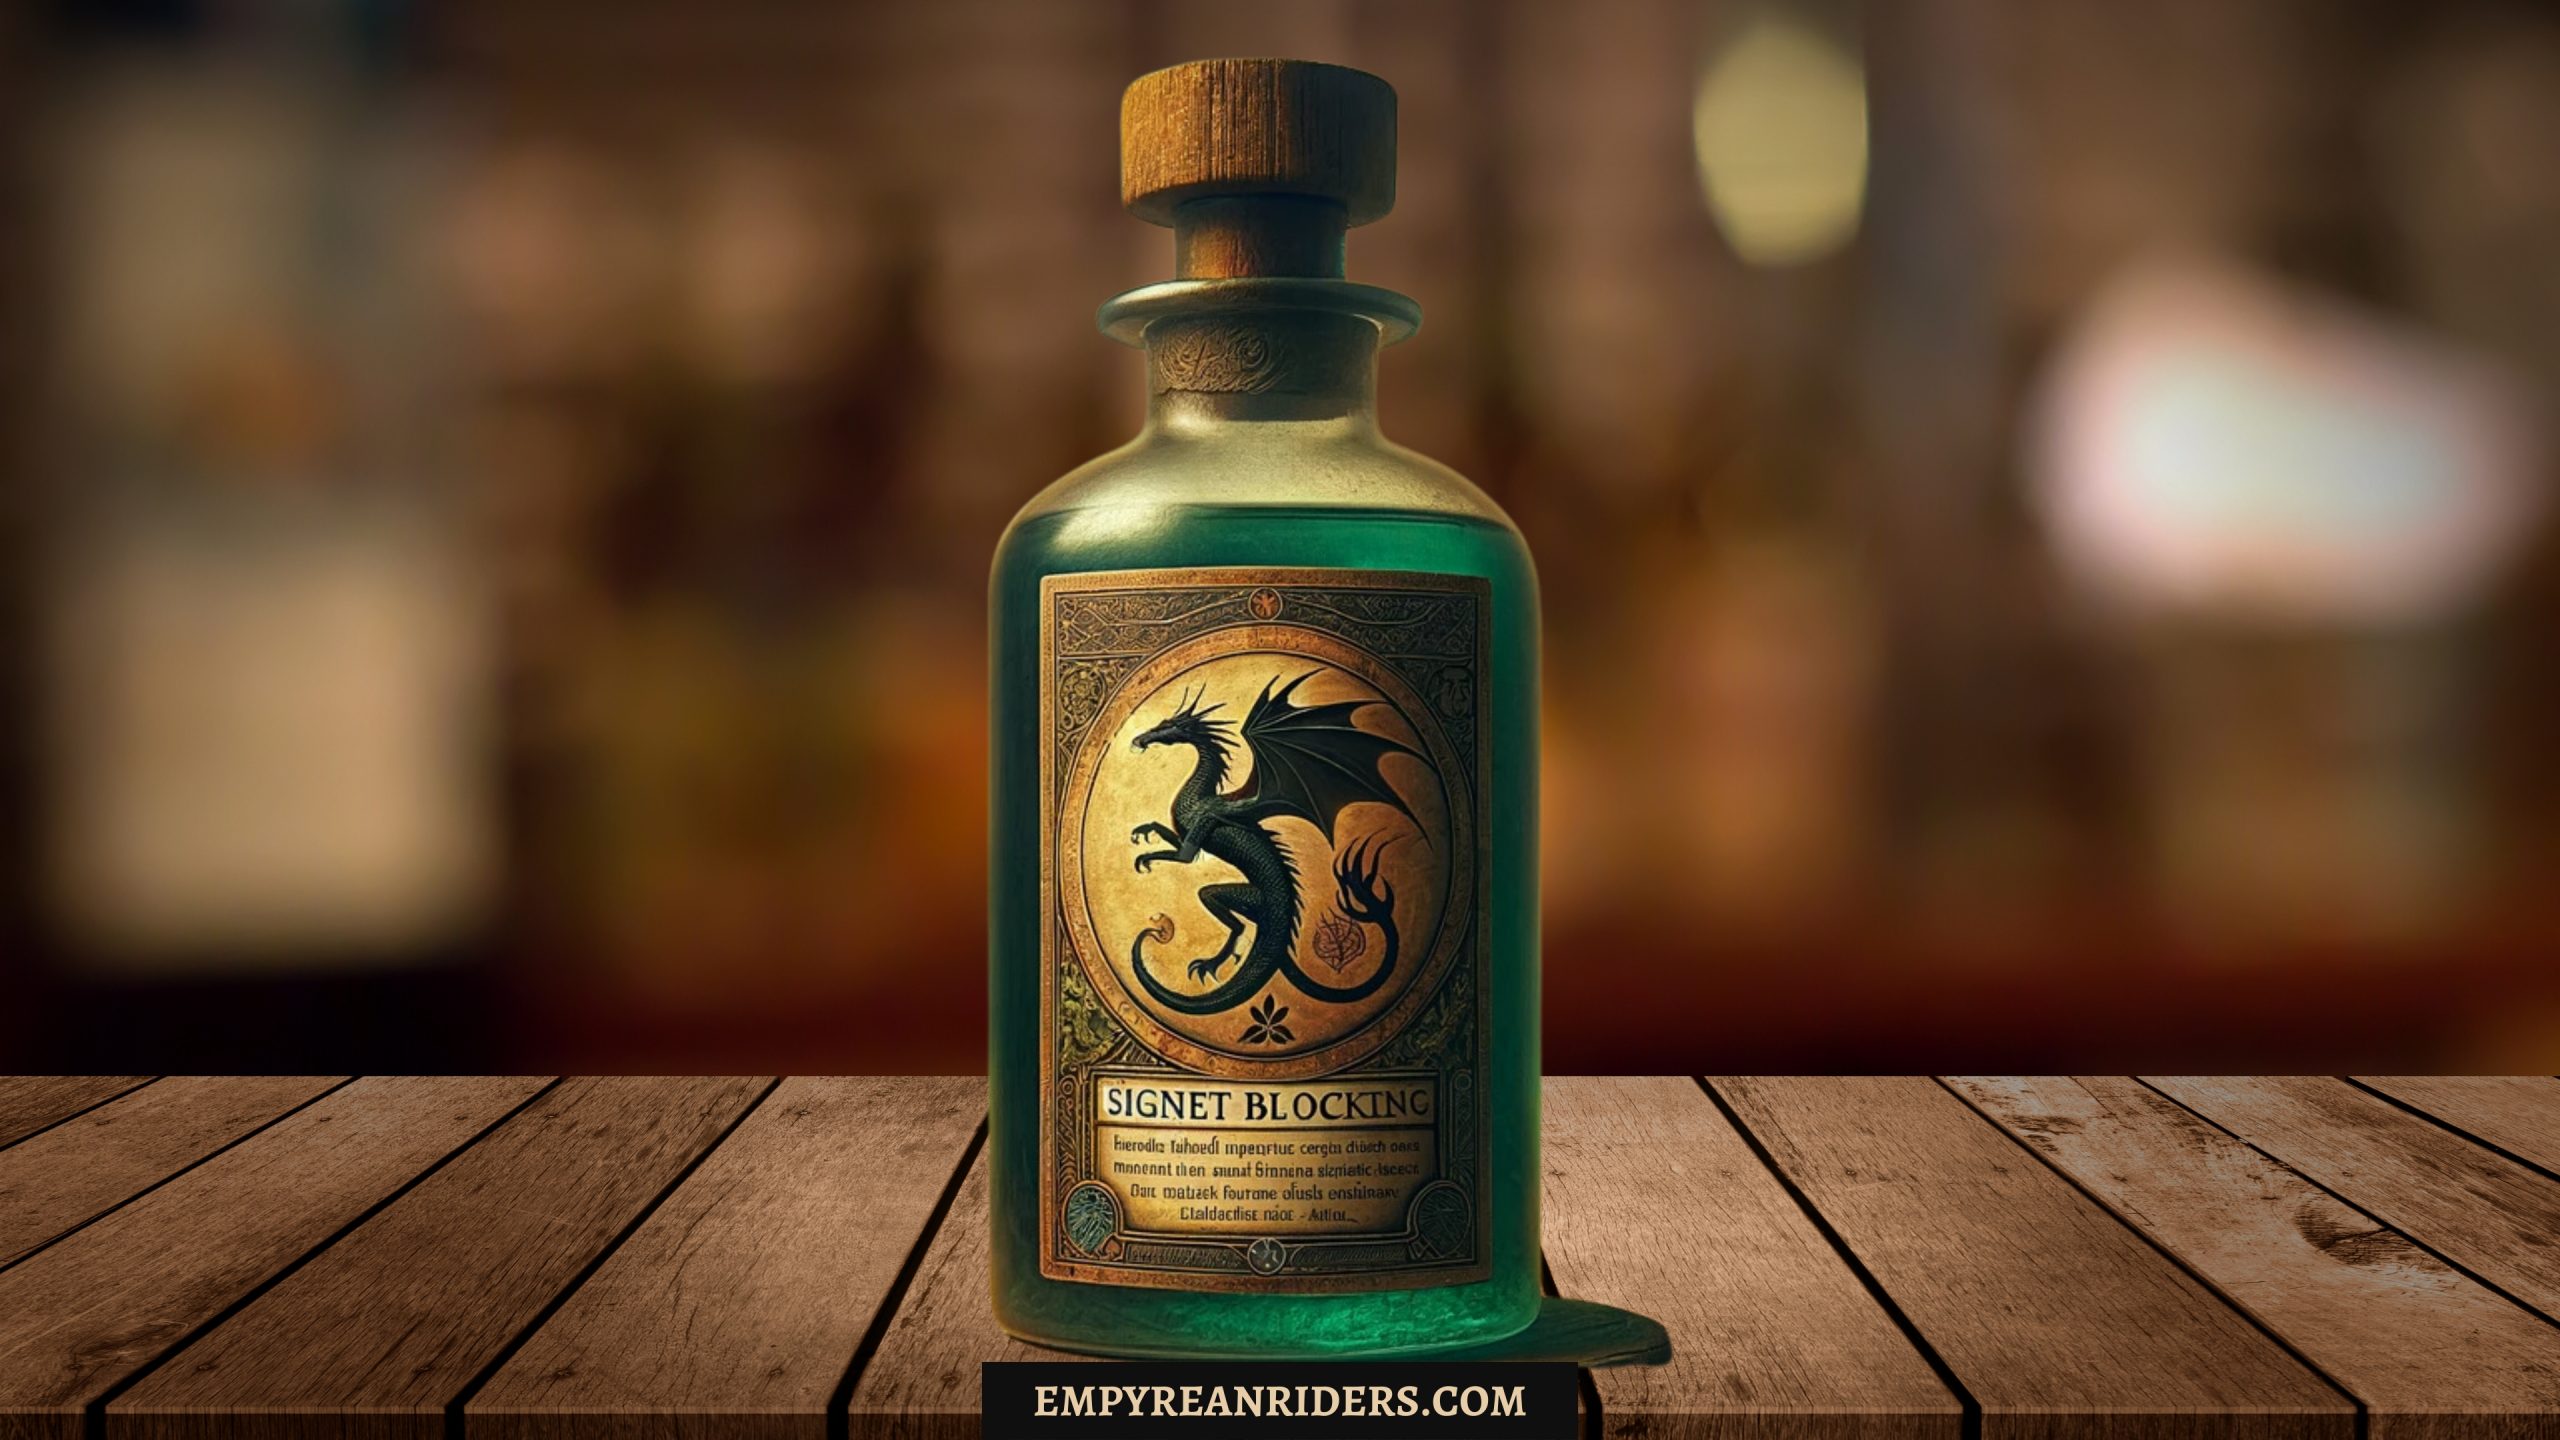 The serum / elixir which dulls the connection between rider and dragon and keeps the venin under control